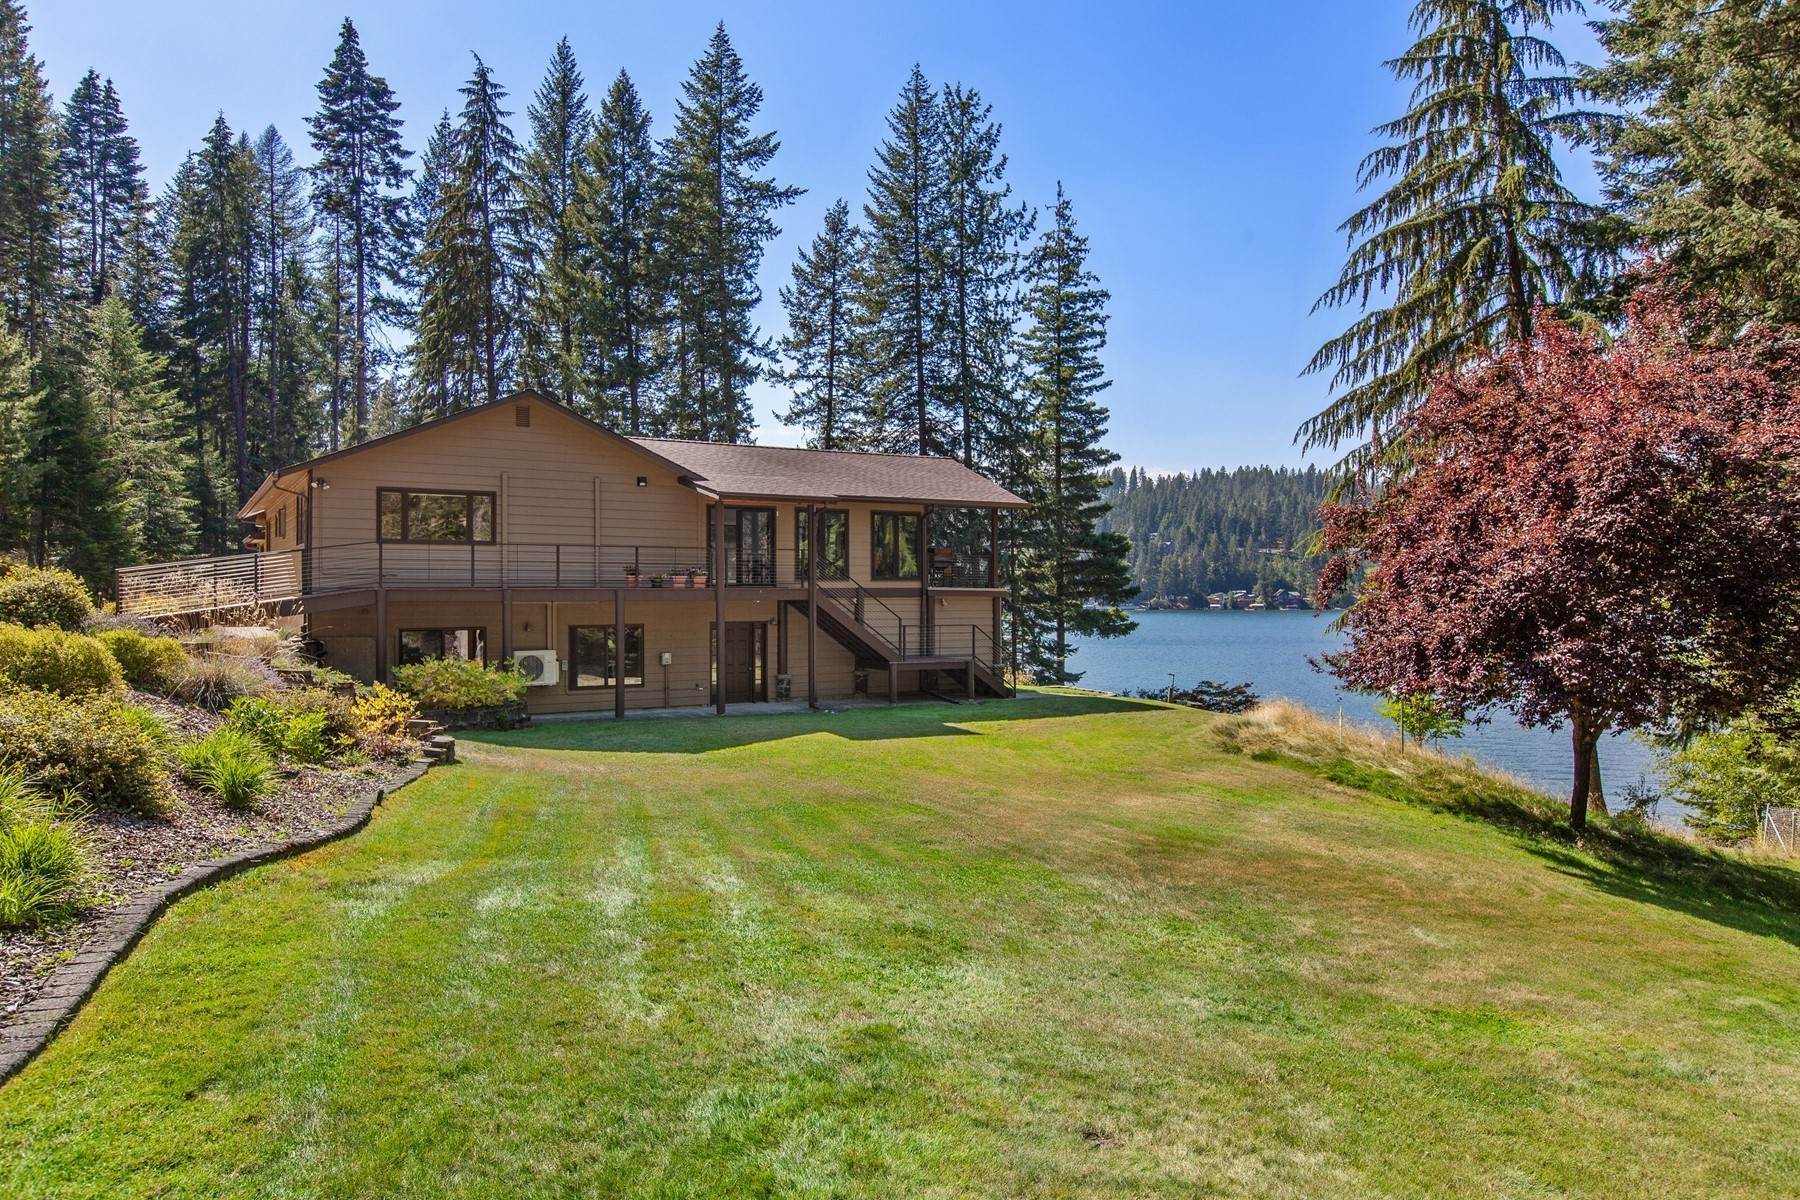 35. Single Family Homes for Sale at Hayden Lake Mountain Retreat 7285 Henry Point Rd Hayden, Idaho 83835 United States